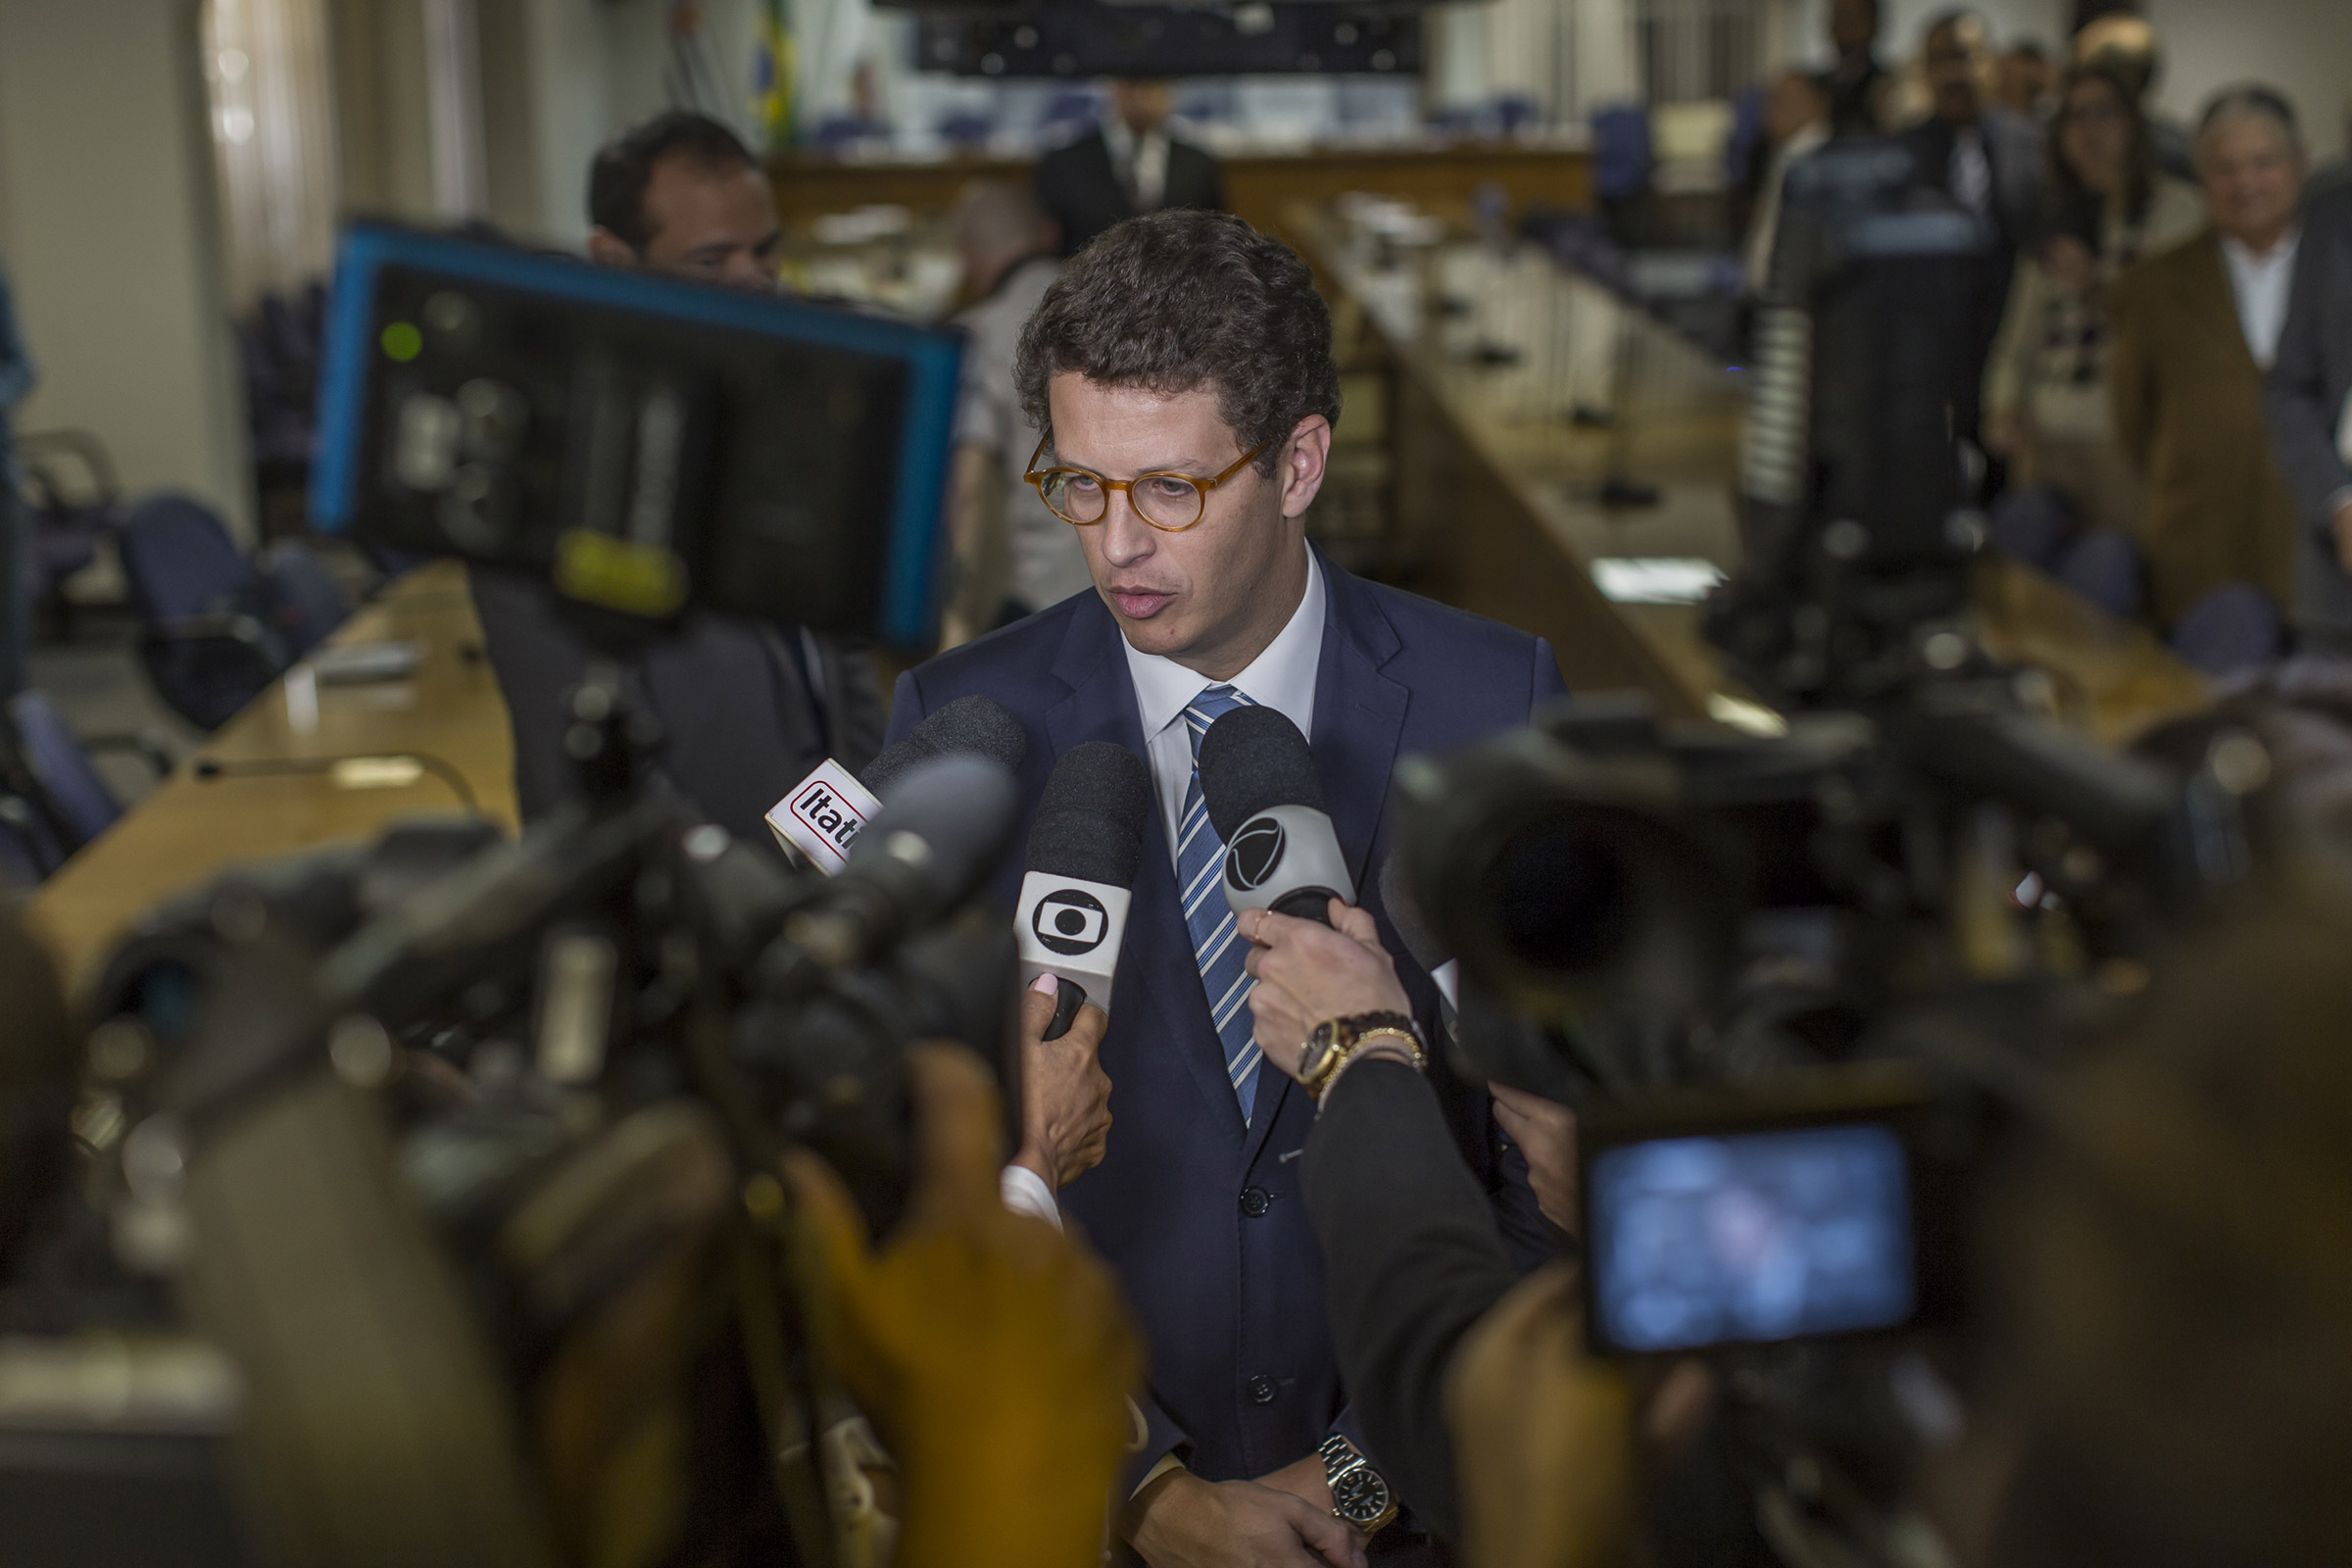 Ricardo Salles, Brazil's environment minister, speaks to journalists in Sao Paulo in August 2019. Activists say Salles is working to appease certain business sectors that form a crucial part of Bolsonaro's support base.